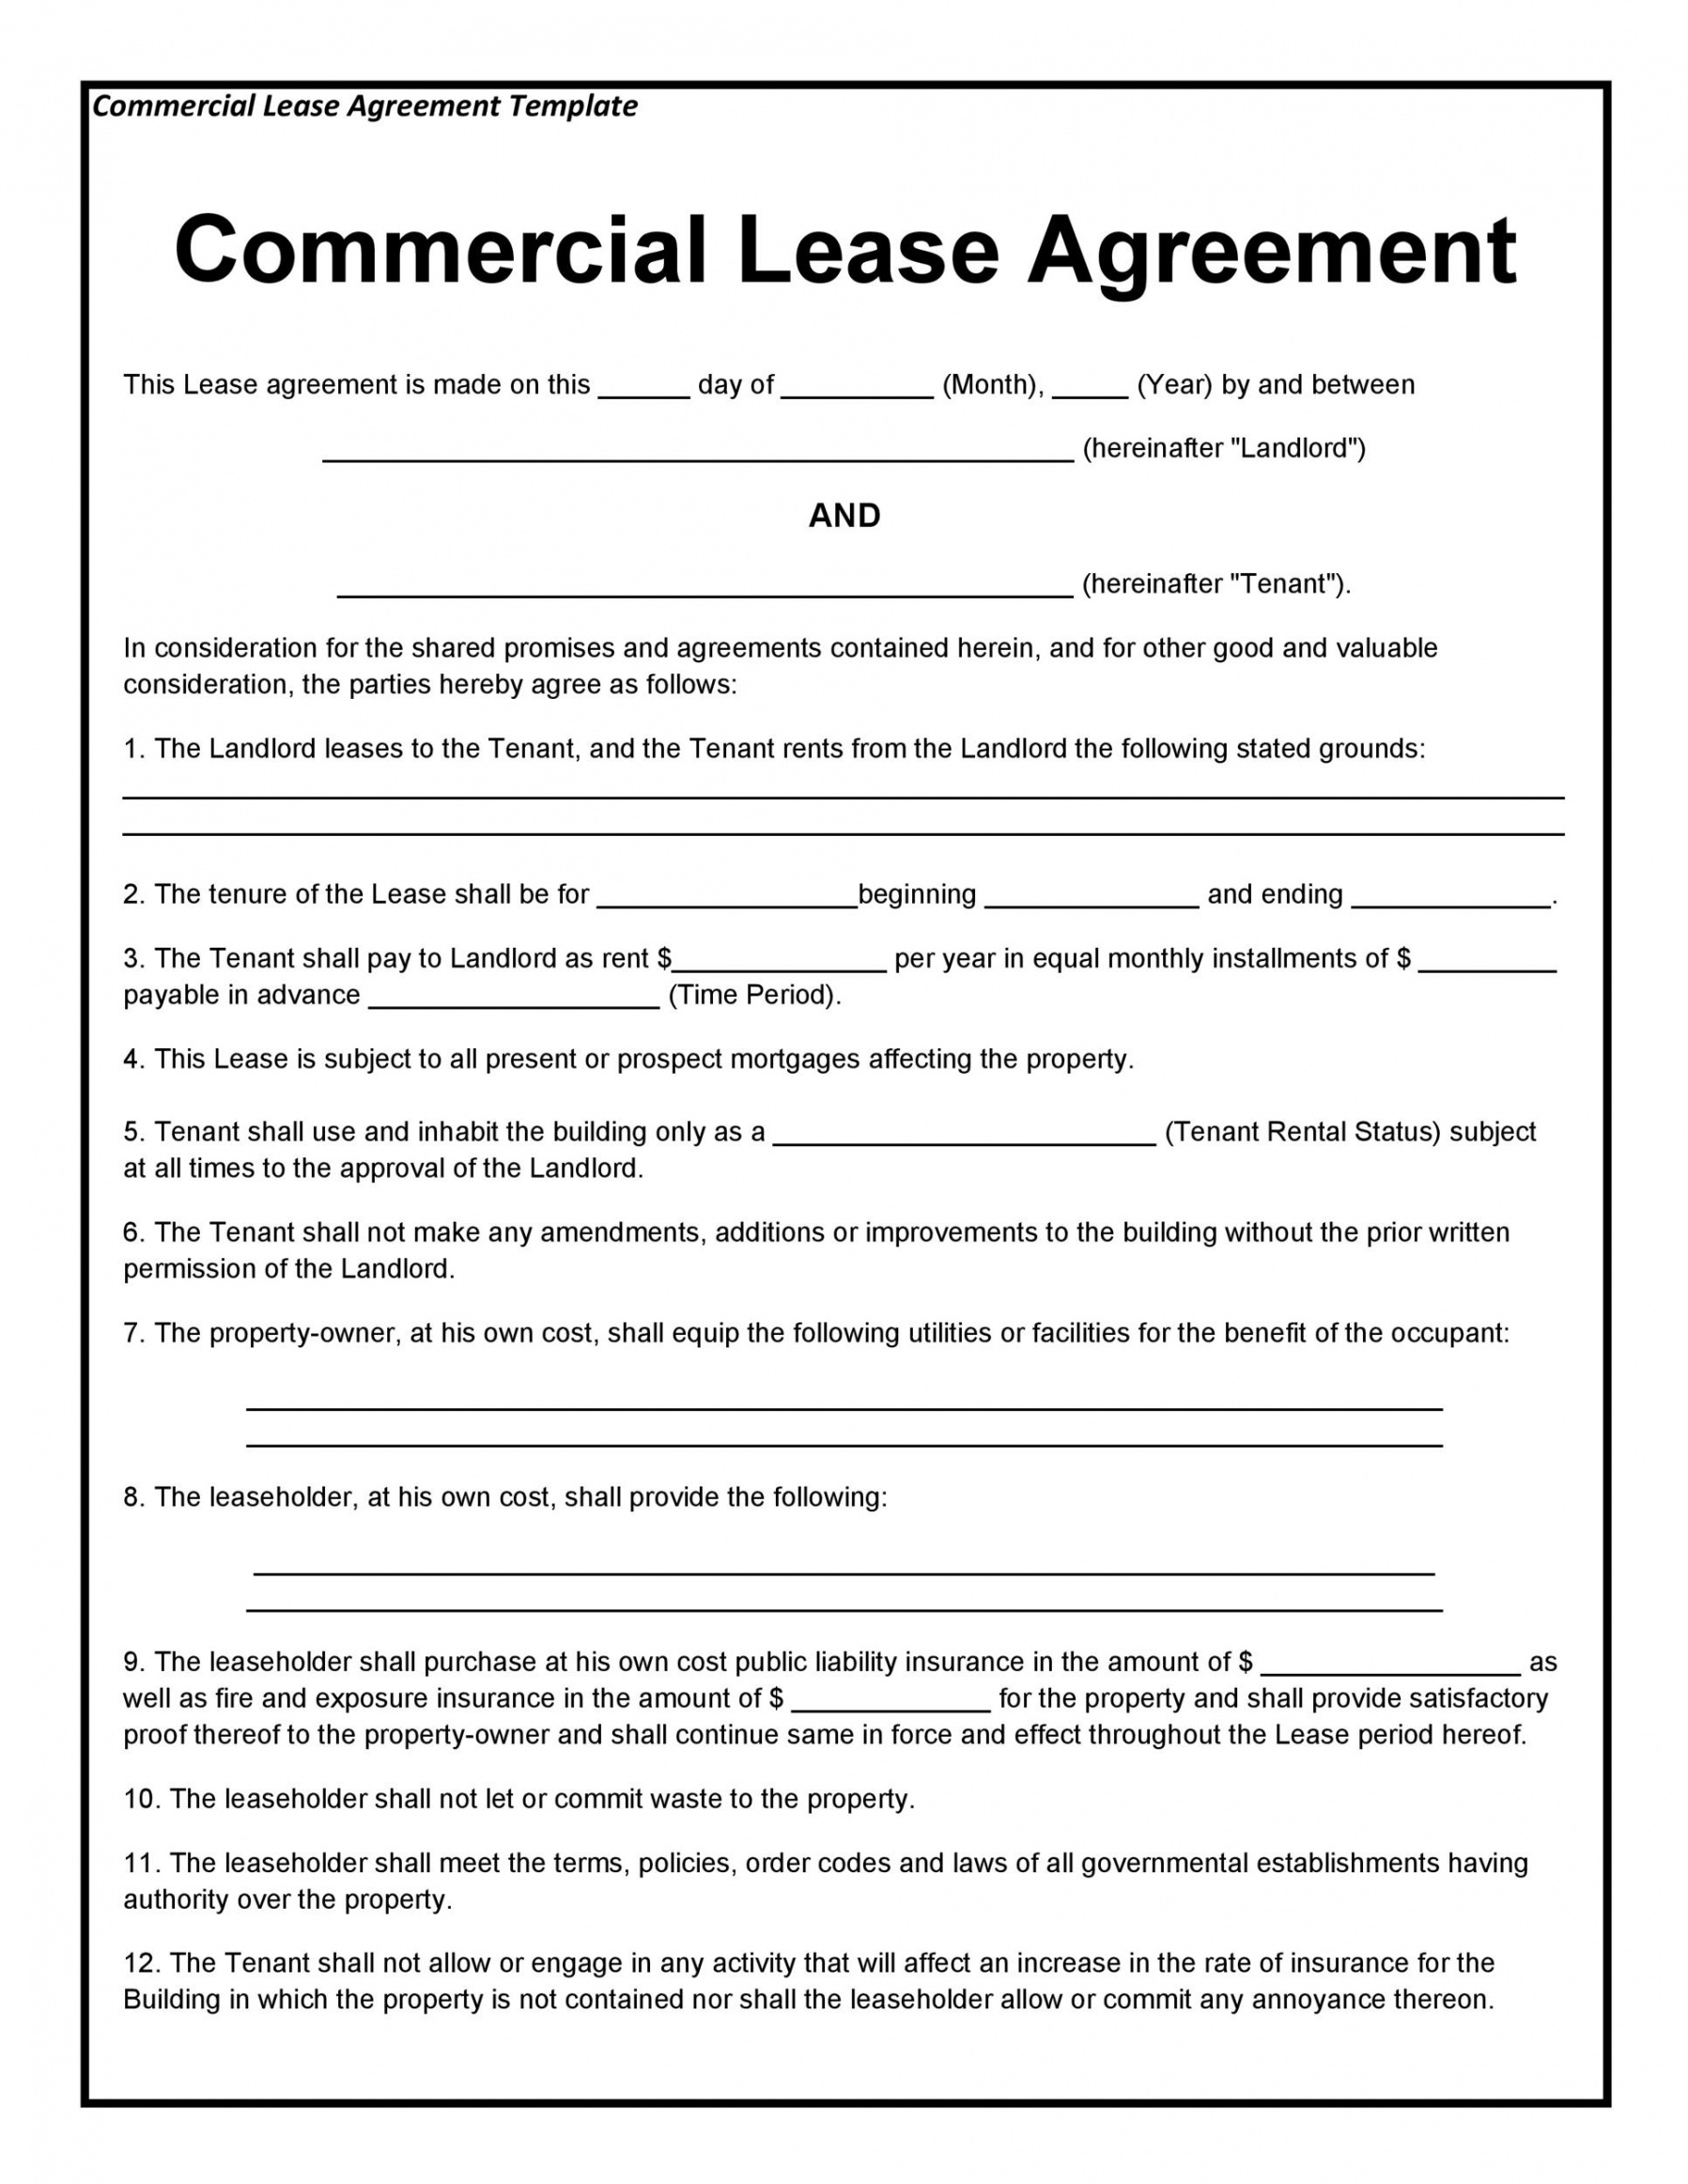 26 free commercial lease agreement templates  templatelab commercial lease contract template excel